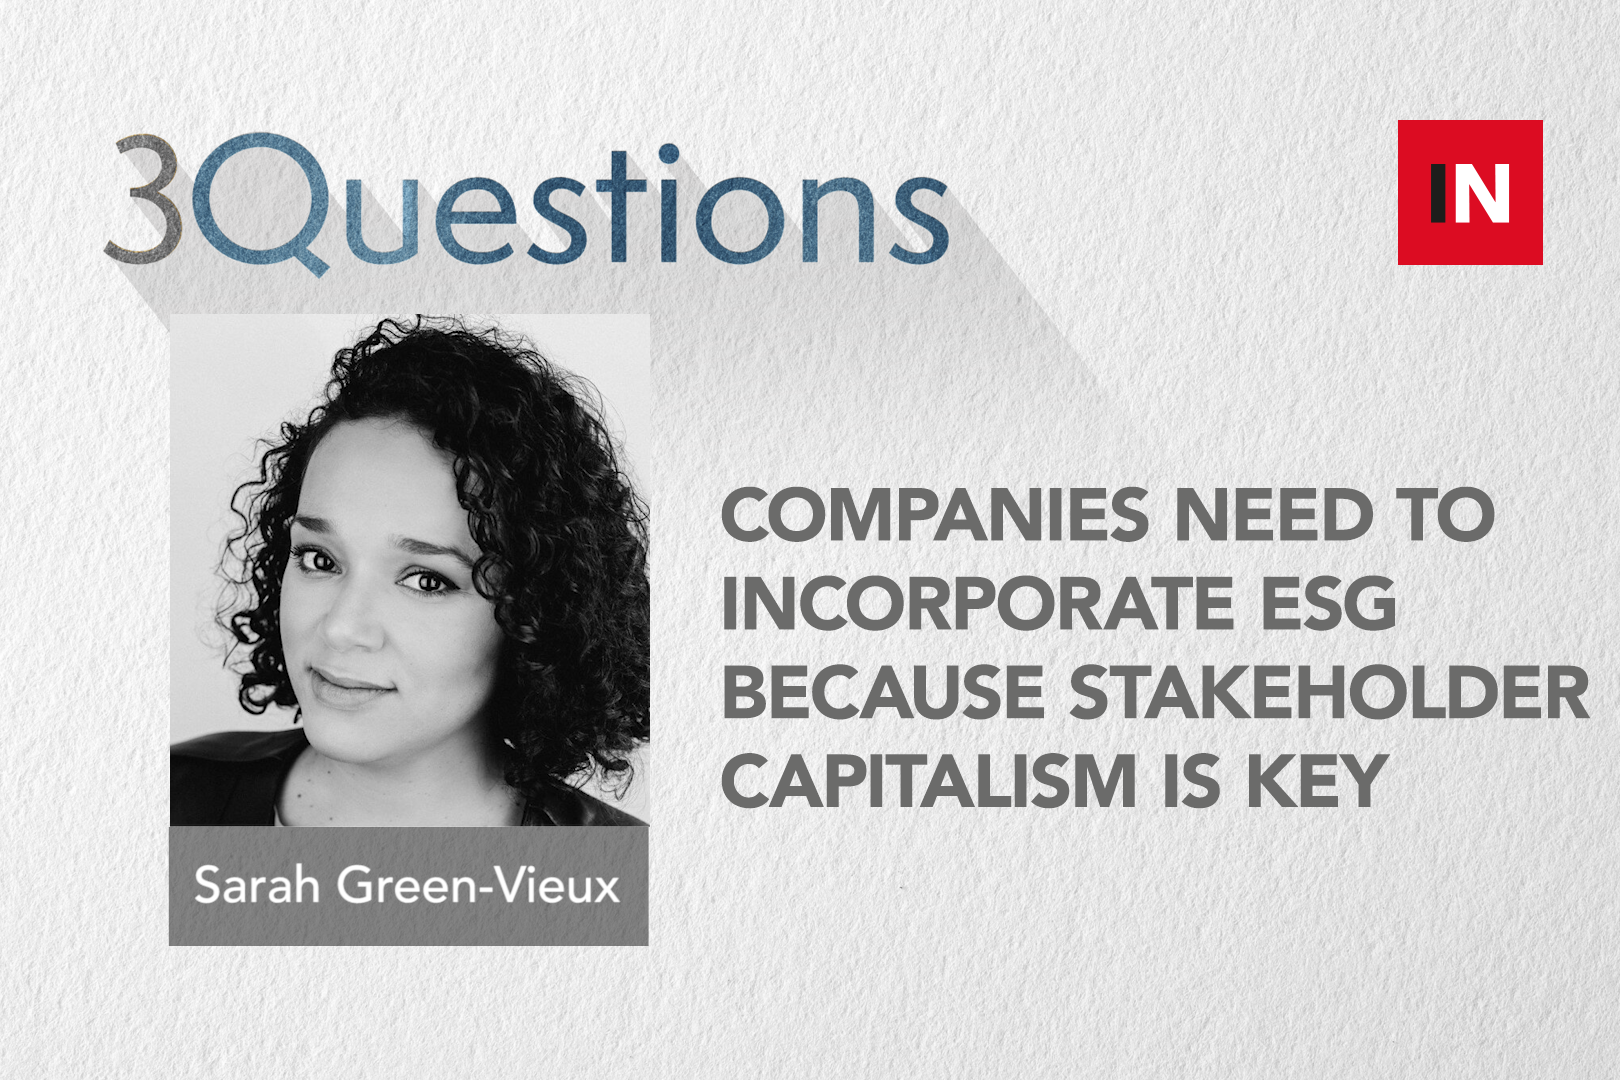 Companies need to incorporate ESG because stakeholder capitalism is key